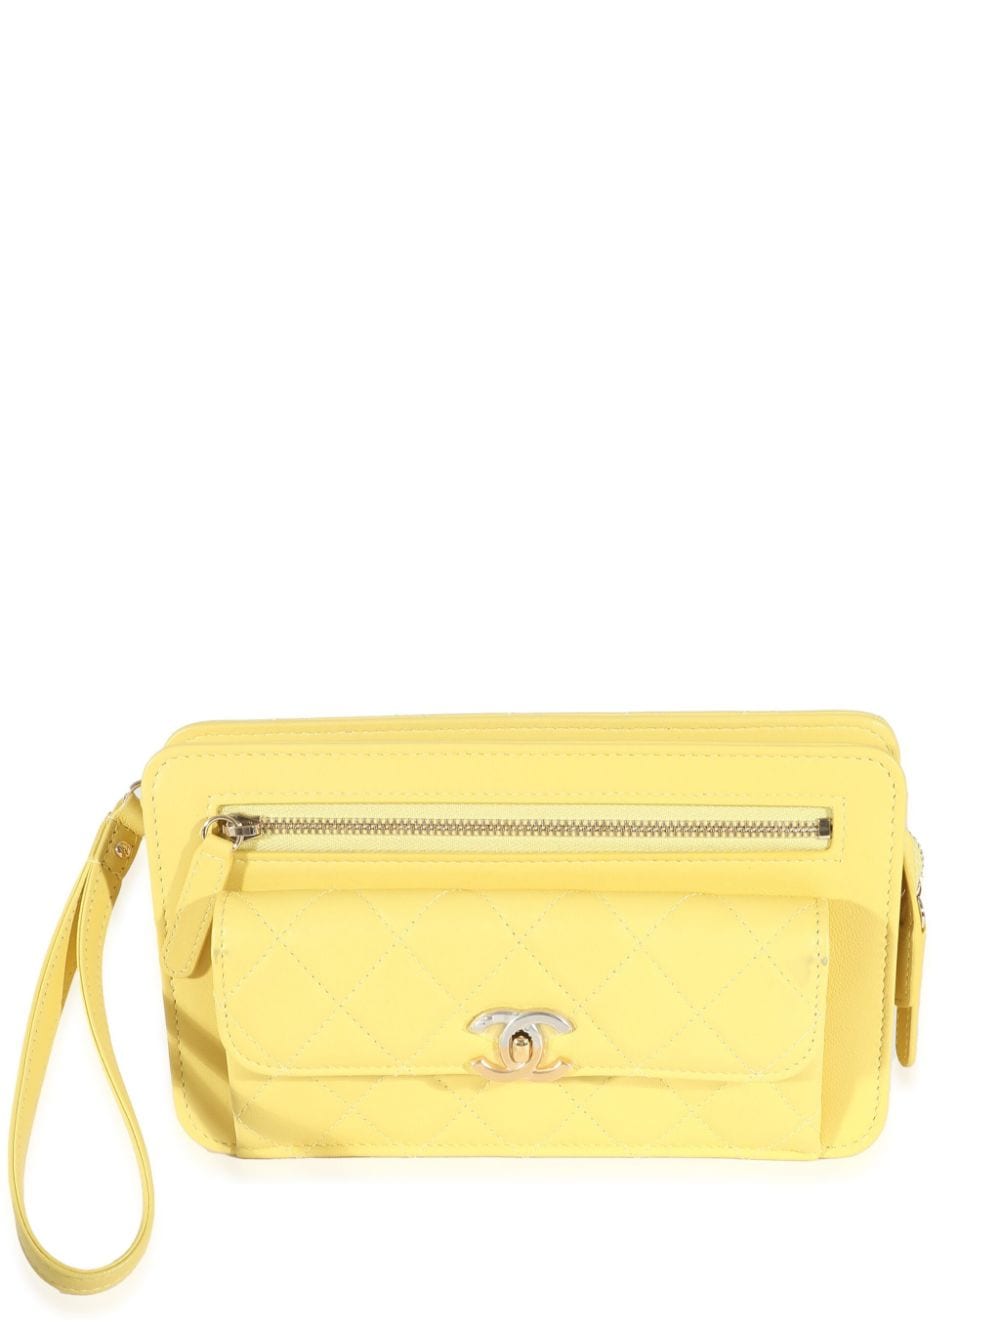 Chanel Pre-owned 2019 Diamond Quilted Clutch Bag - Yellow